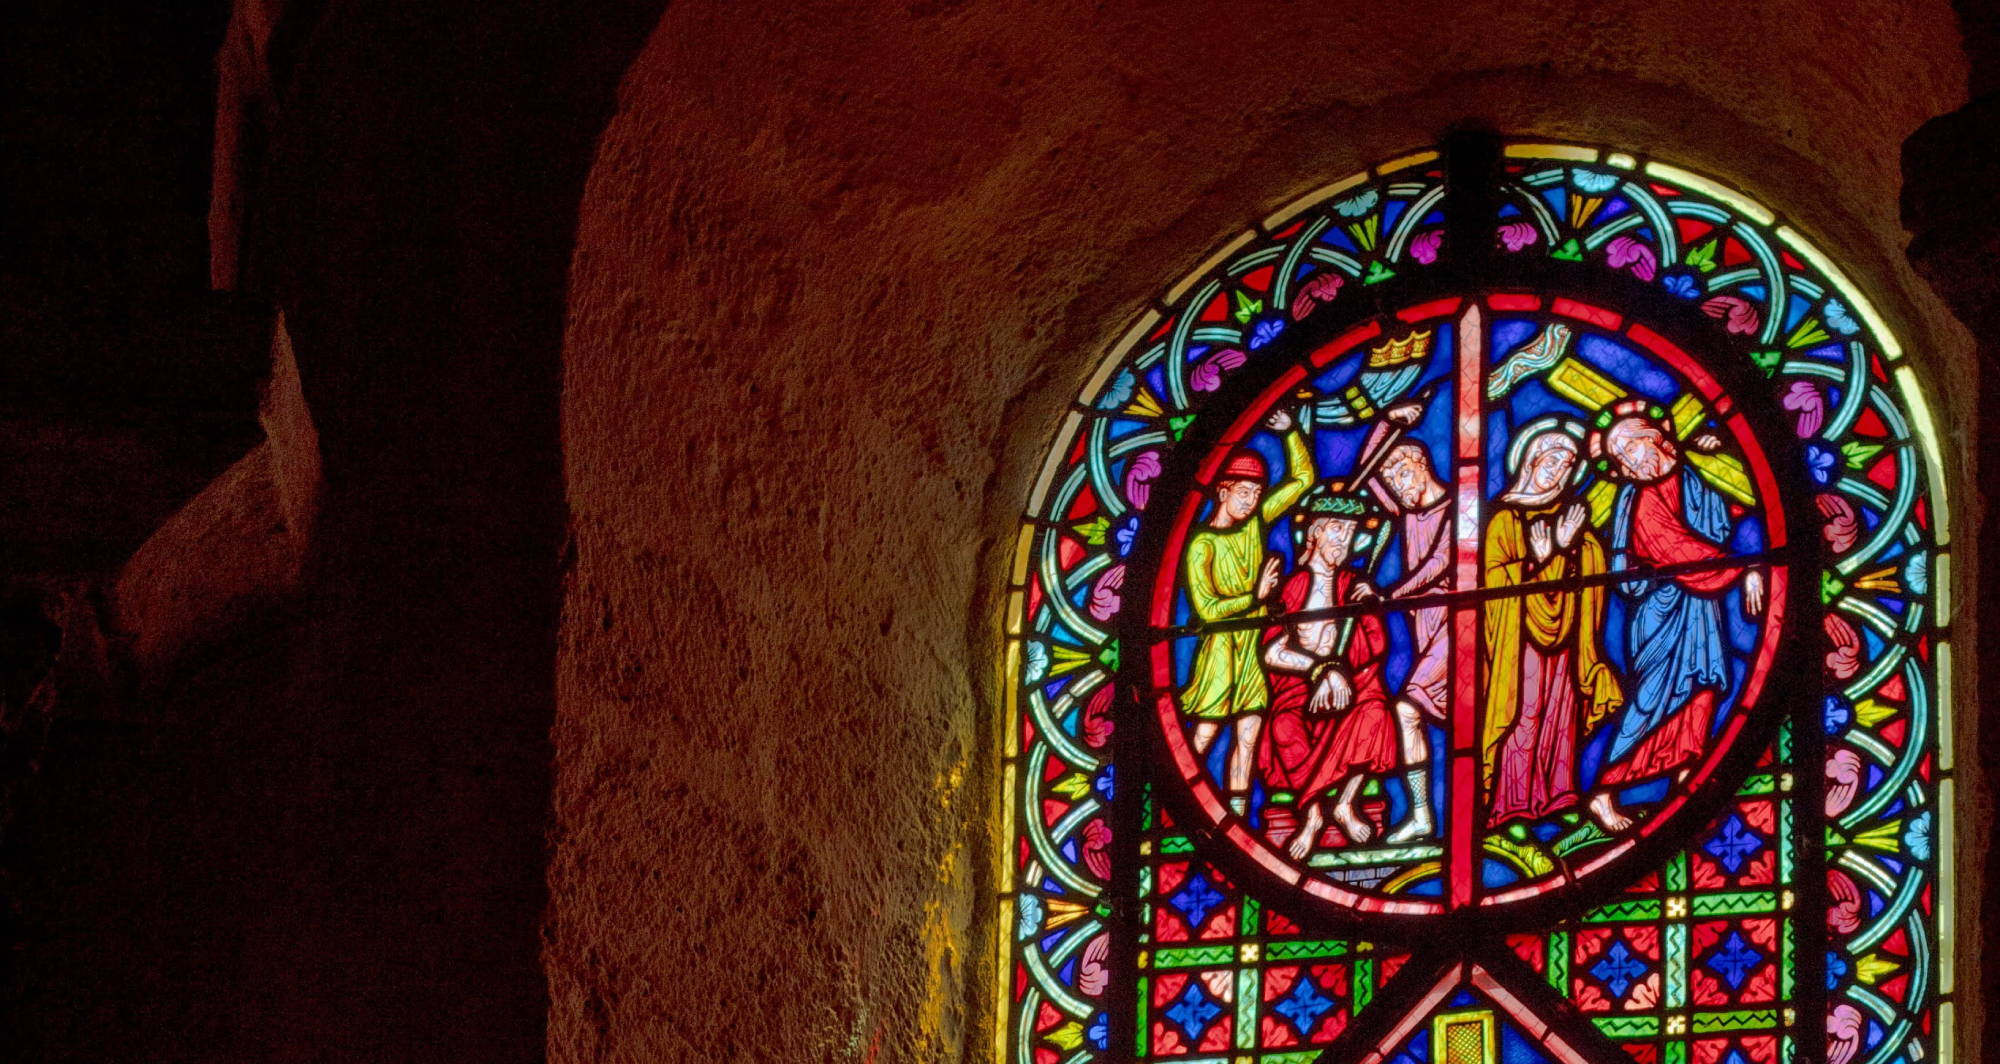  a colorful stained glass window light up in an old stone building